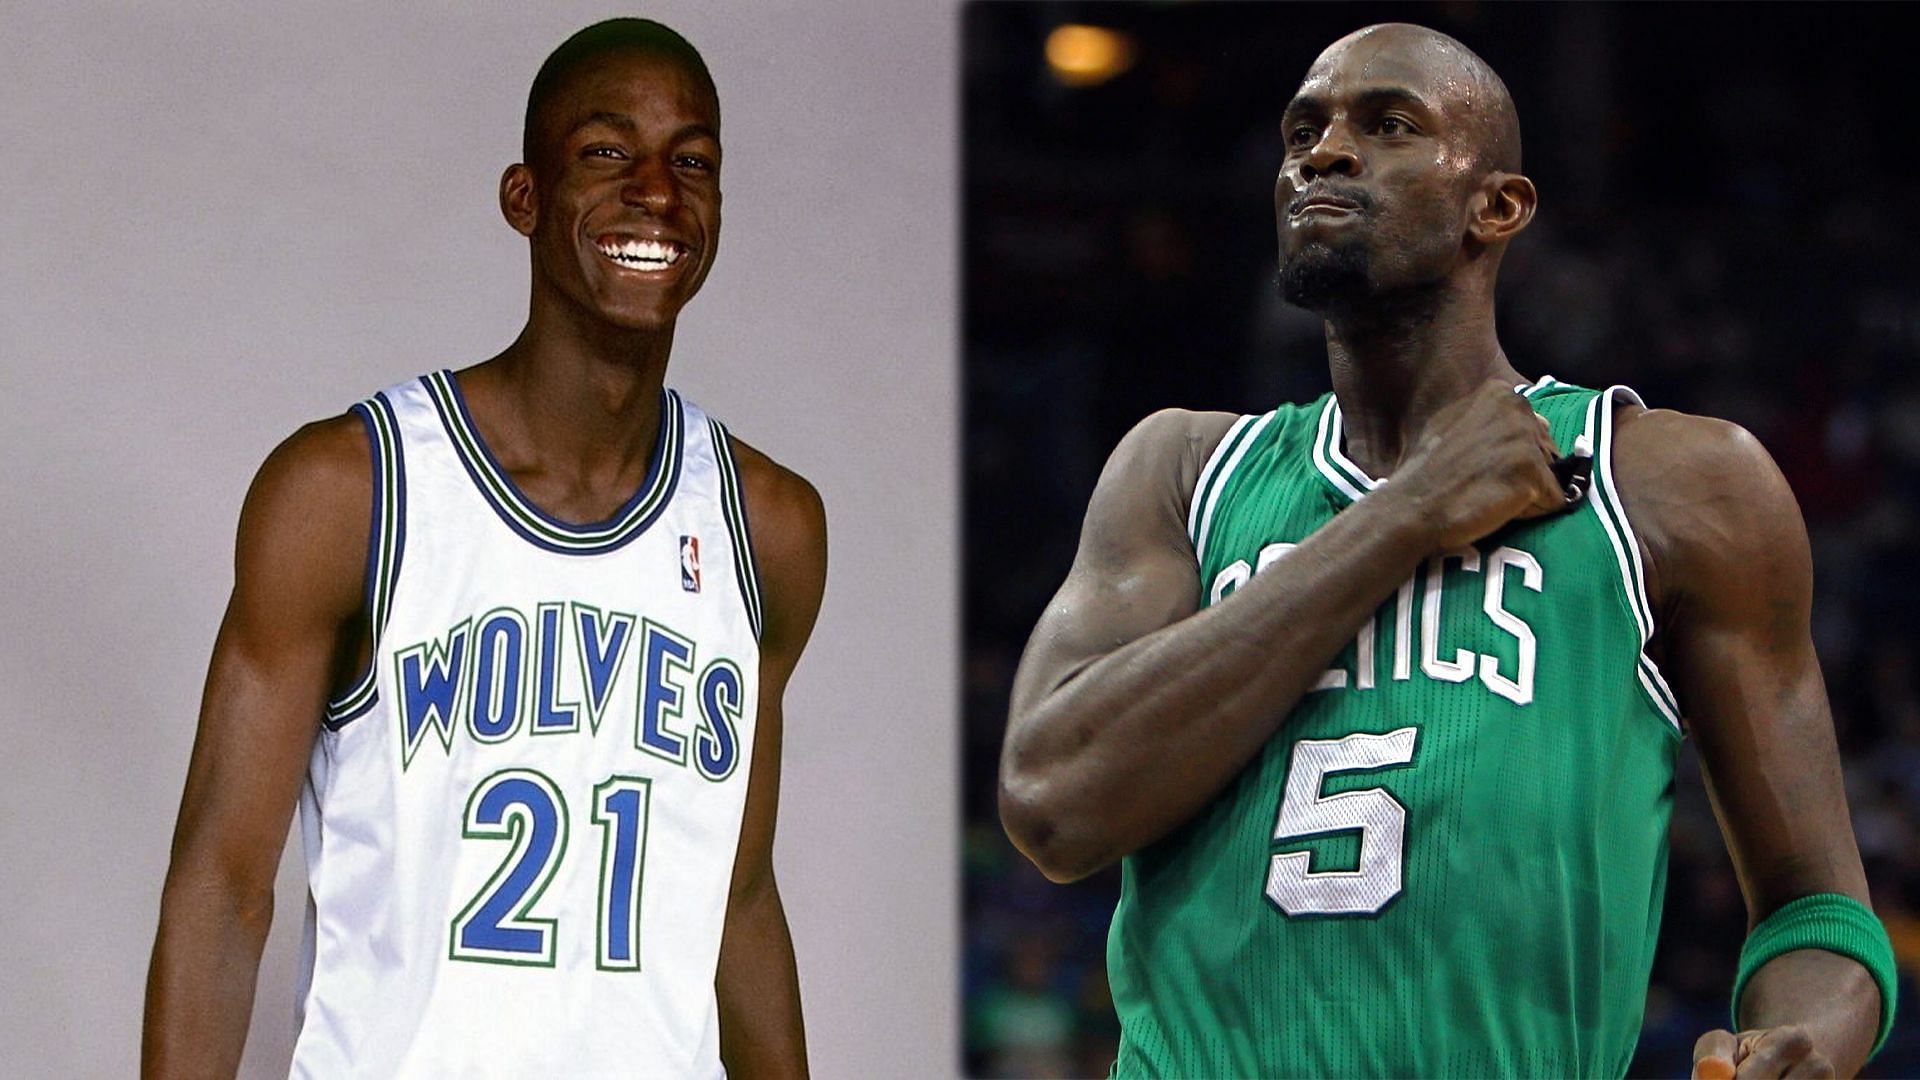 Garnett&#039;s transformation helped him become one of the most dominant NBA players ever